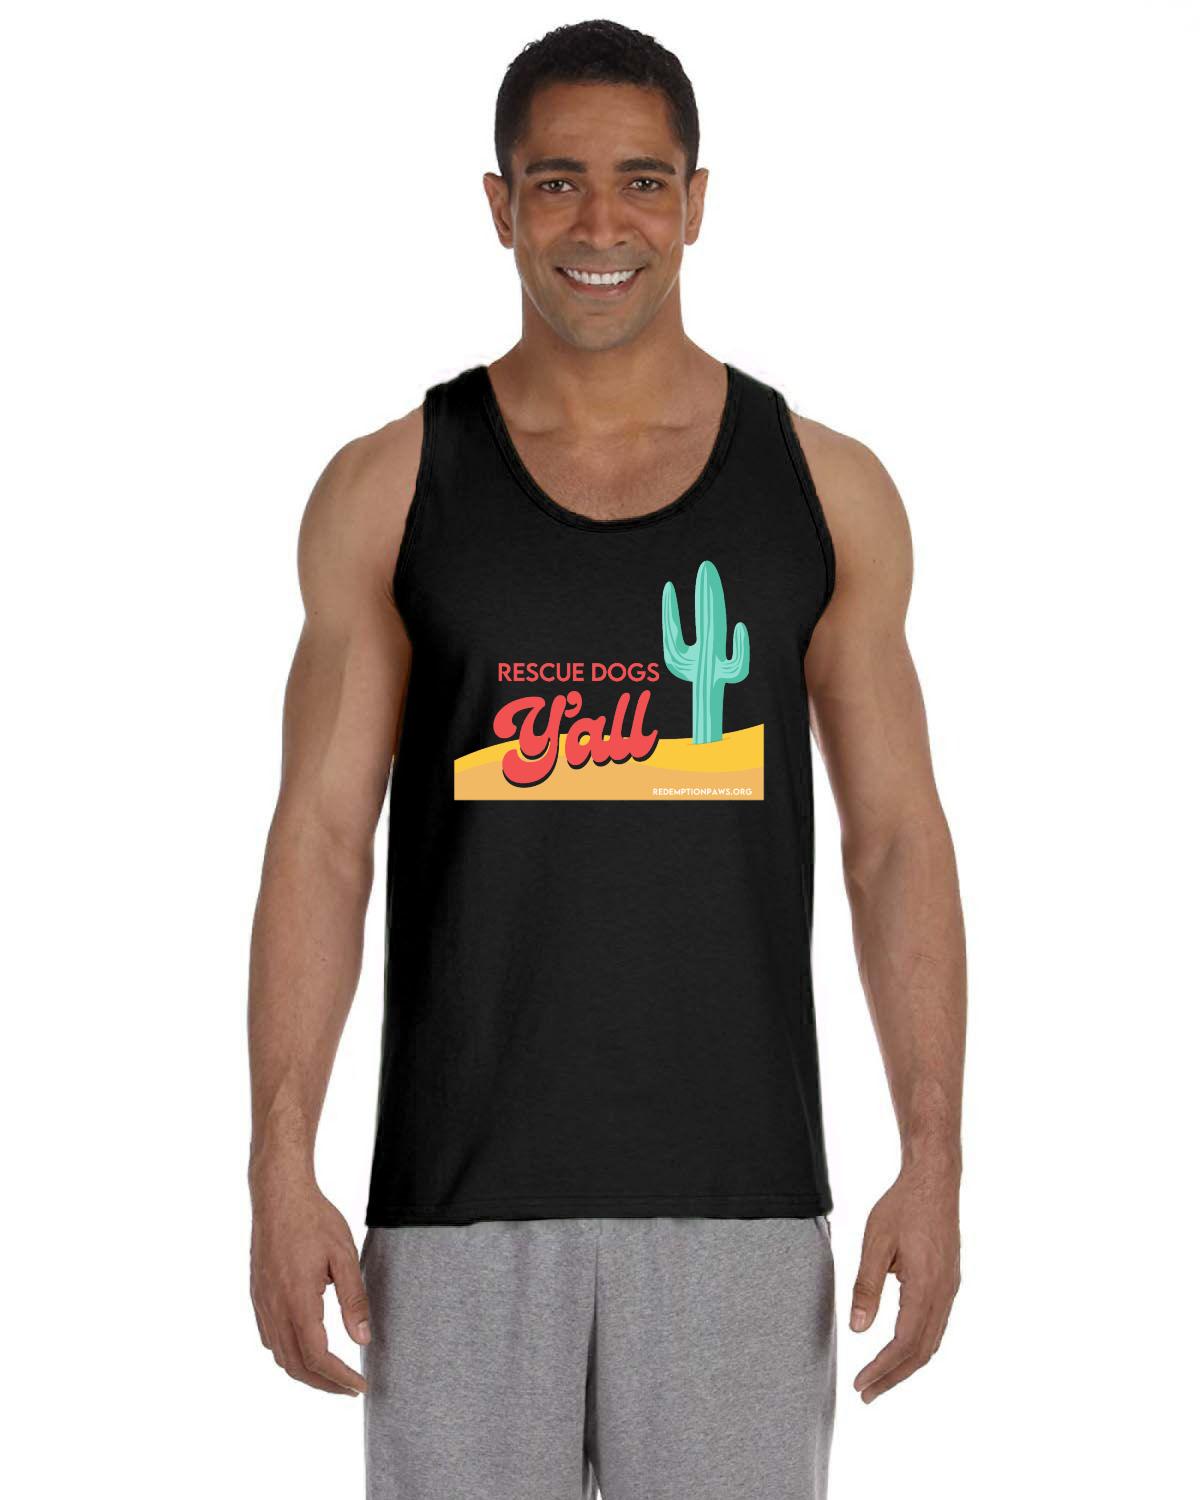 Rescue Dogs Y'all Tank Top